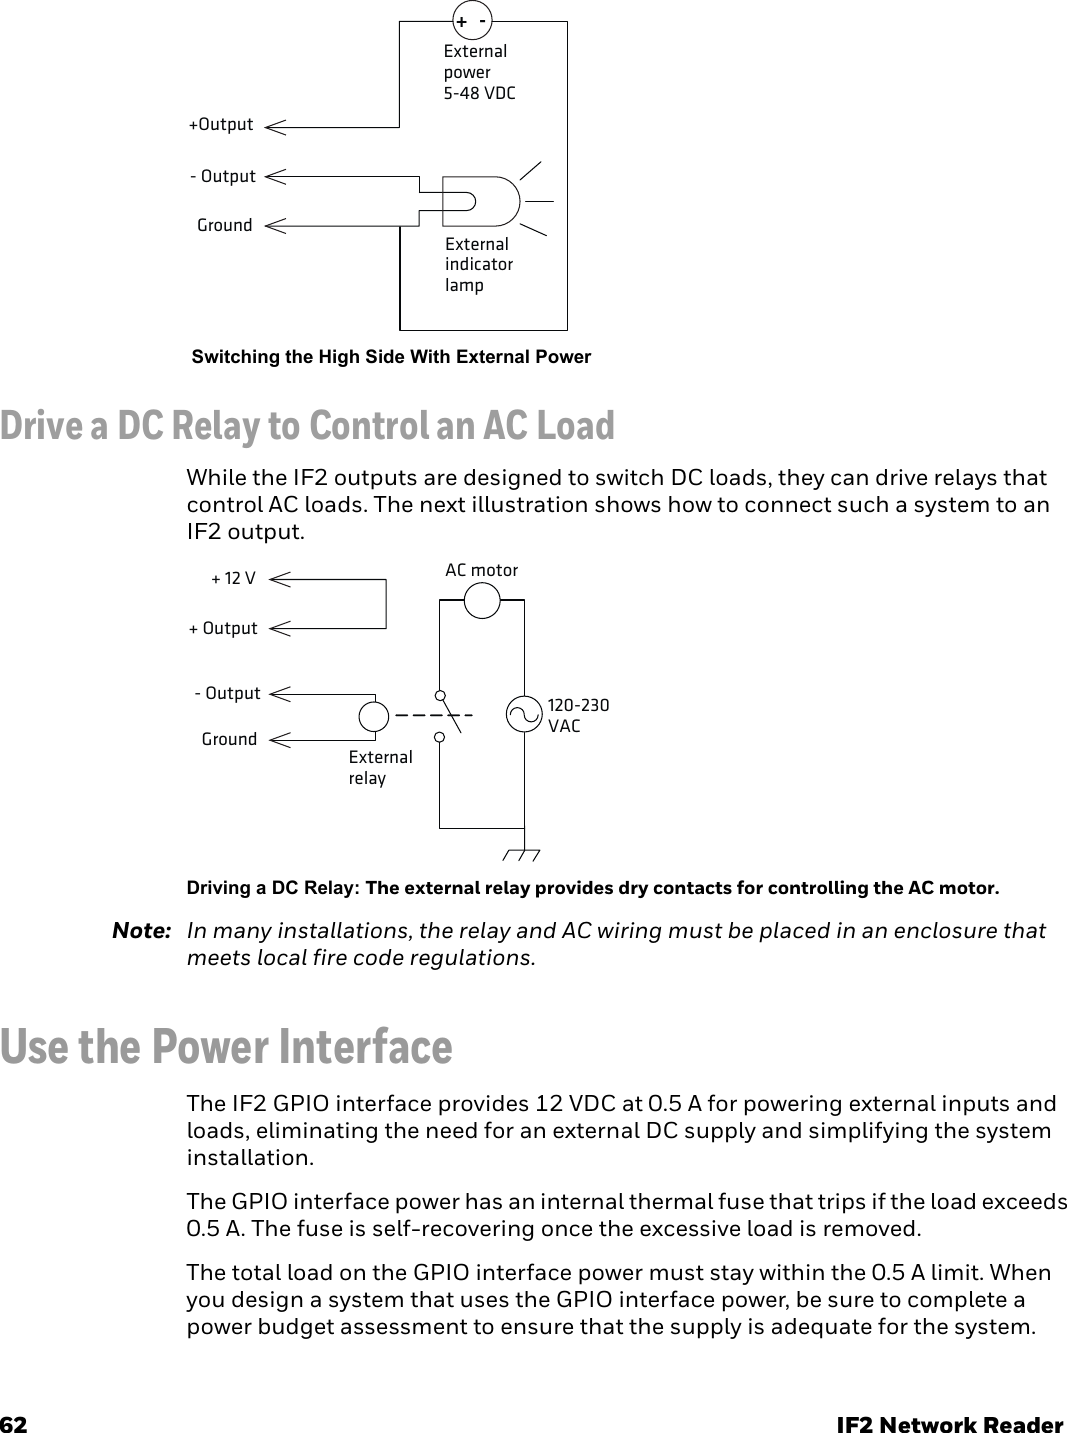 62 IF2 Network Reader Switching the High Side With External PowerDrive a DC Relay to Control an AC LoadWhile the IF2 outputs are designed to switch DC loads, they can drive relays that control AC loads. The next illustration shows how to connect such a system to an IF2 output.Driving a DC Relay: The external relay provides dry contacts for controlling the AC motor.Note: In many installations, the relay and AC wiring must be placed in an enclosure that meets local fire code regulations.Use the Power InterfaceThe IF2 GPIO interface provides 12 VDC at 0.5 A for powering external inputs and loads, eliminating the need for an external DC supply and simplifying the system installation.The GPIO interface power has an internal thermal fuse that trips if the load exceeds 0.5 A. The fuse is self-recovering once the excessive load is removed.The total load on the GPIO interface power must stay within the 0.5 A limit. When you design a system that uses the GPIO interface power, be sure to complete a power budget assessment to ensure that the supply is adequate for the system.Externalindicator lampExternalpower5-48 VDC+-Ground+Output- OutputAC motor 120-230 VAC External relay + Output+ 12 VGround- Output